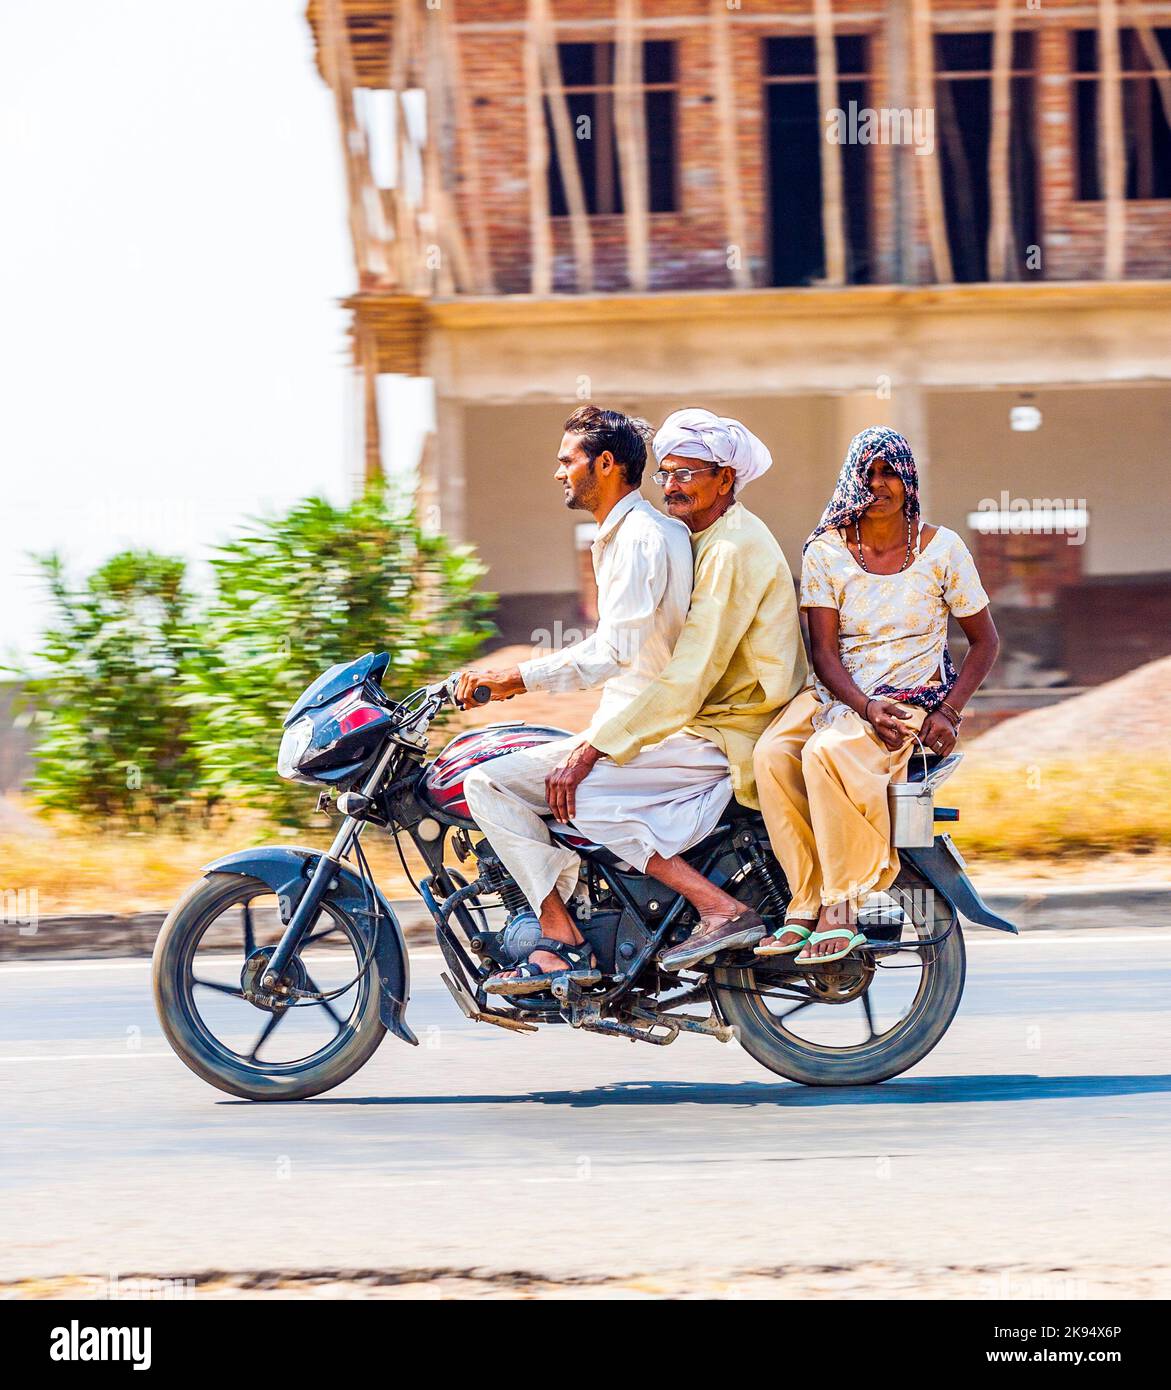 RAJASTHAN - INDIA - OCT 18, 2012: Mother, father and small child riding on scooter through busy highway street  in Rajasthan, India. Up to six family Stock Photo